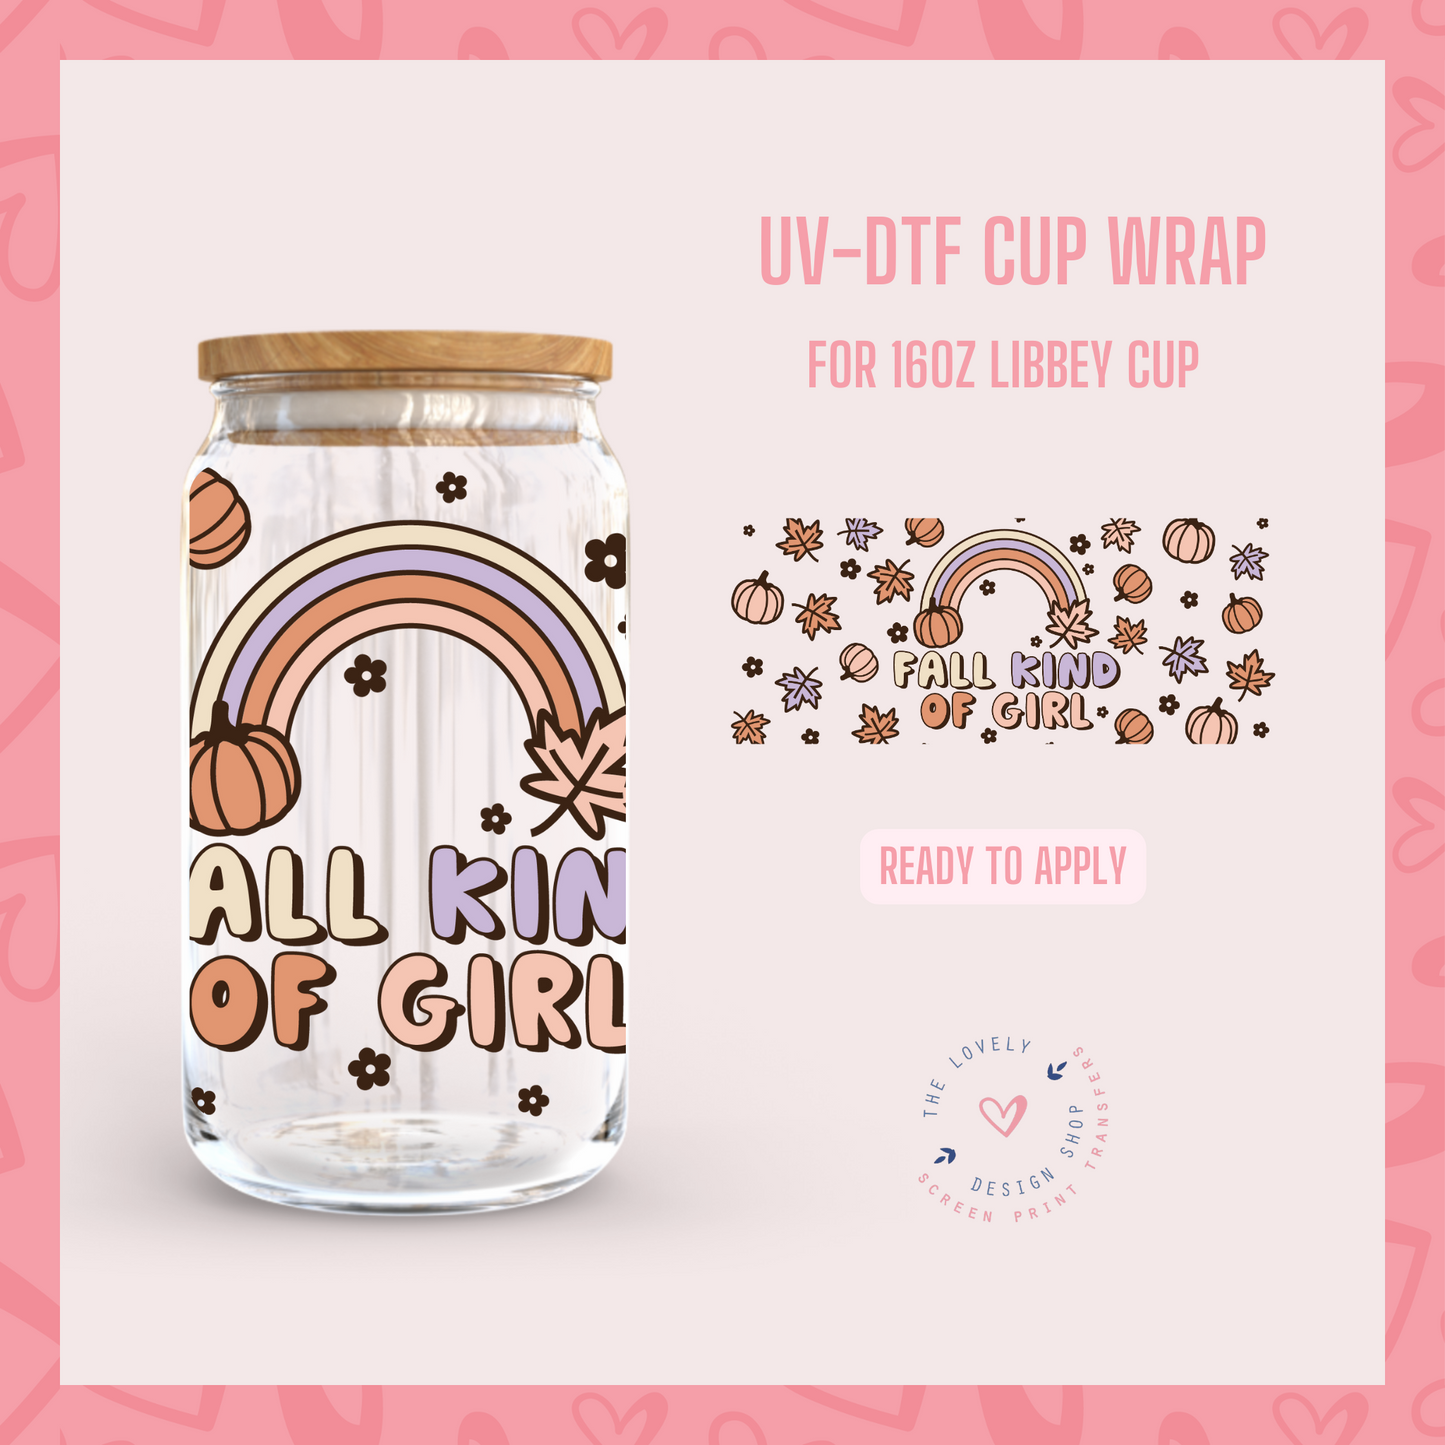 Fall Kind Of Girl - UV DTF 16 oz Libbey Cup Wrap (Ready to Ship)